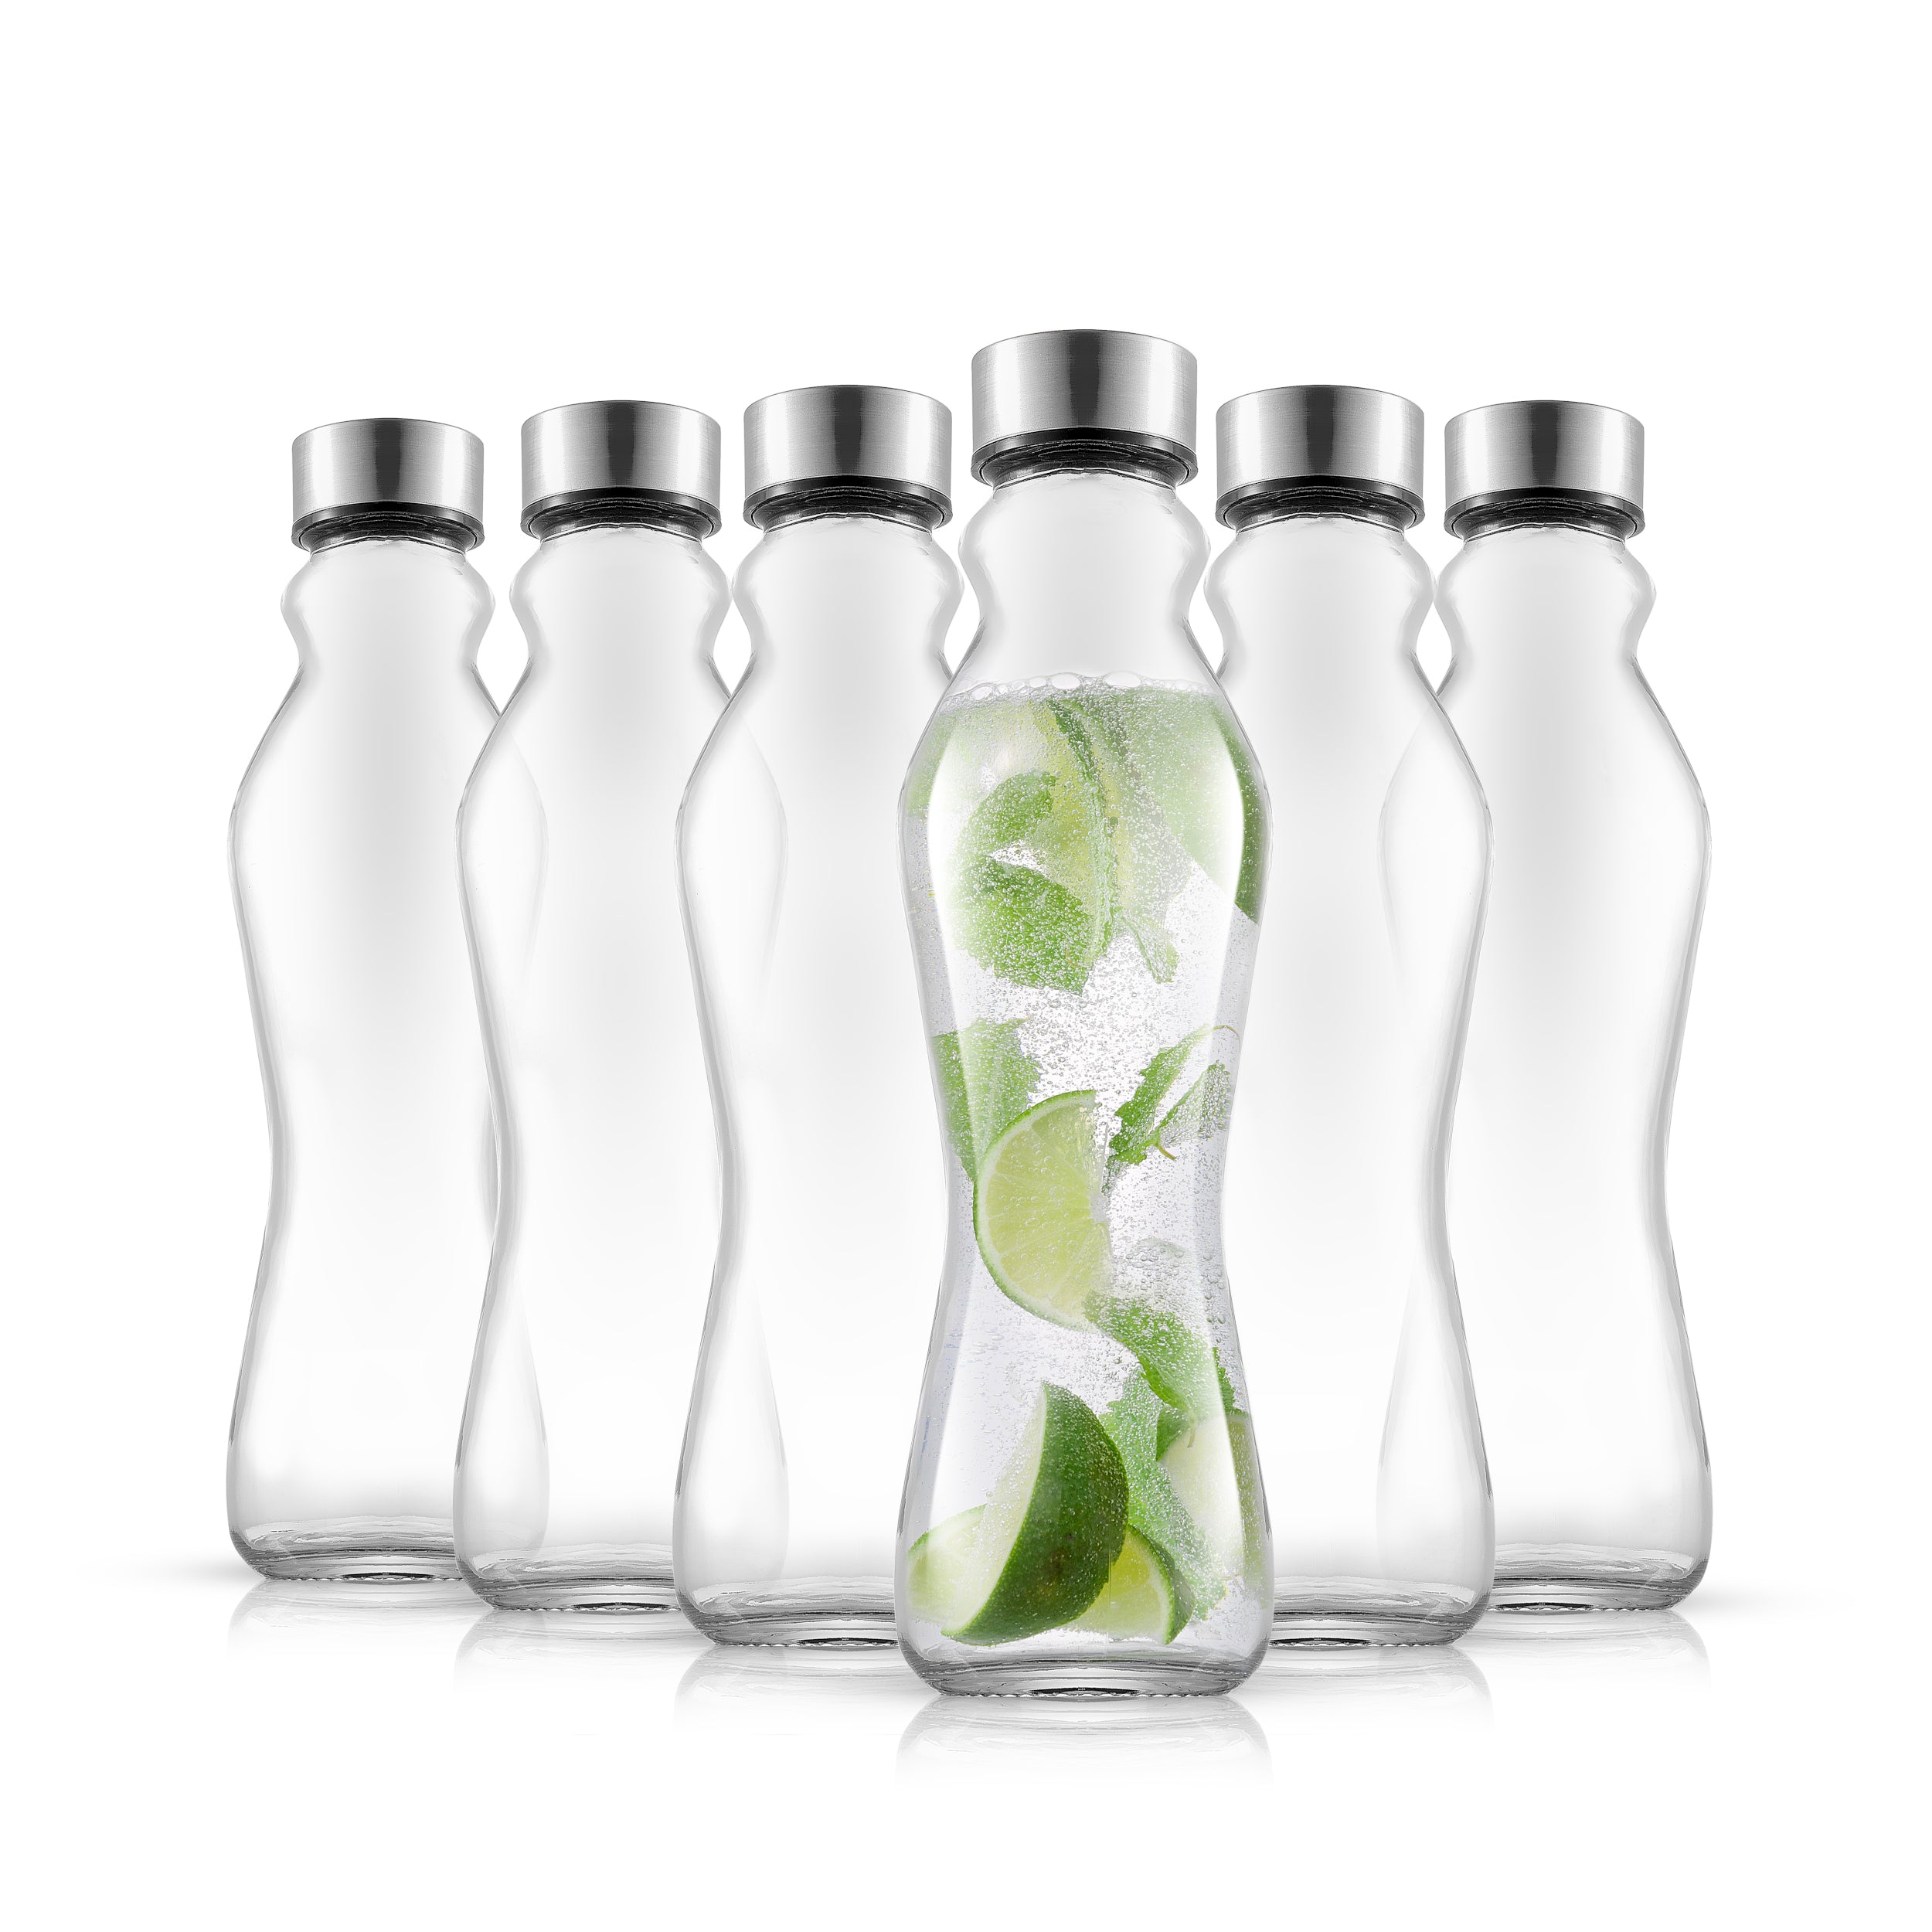 Spring Glass Insulated Water Bottles with Stainless Steel Cap - 18 oz - Set of 6